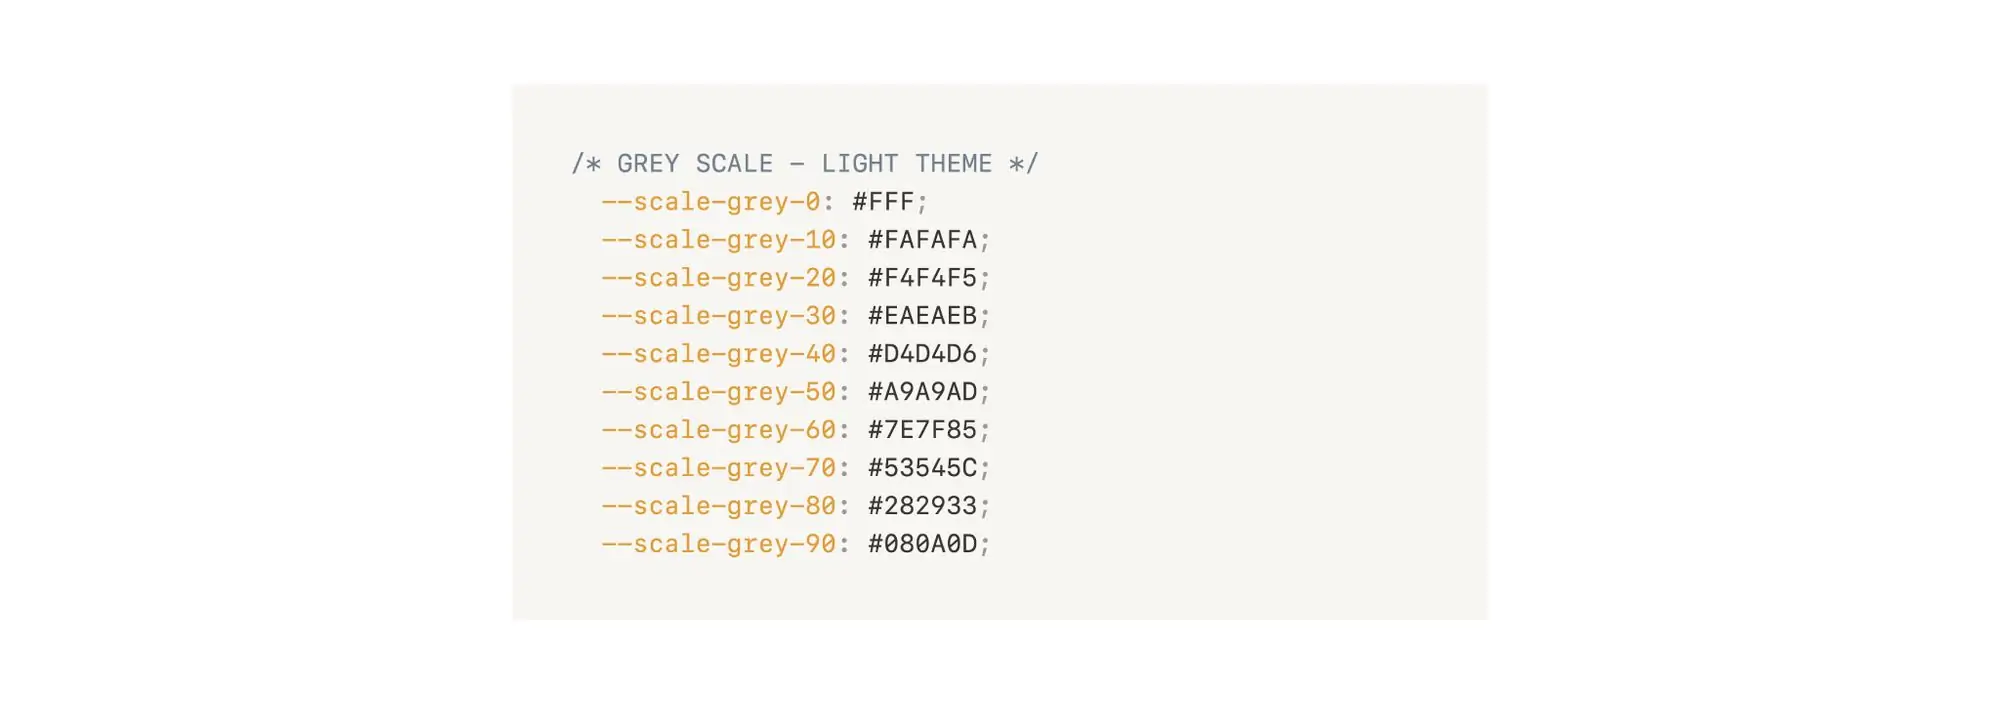 Image of the scale for grey